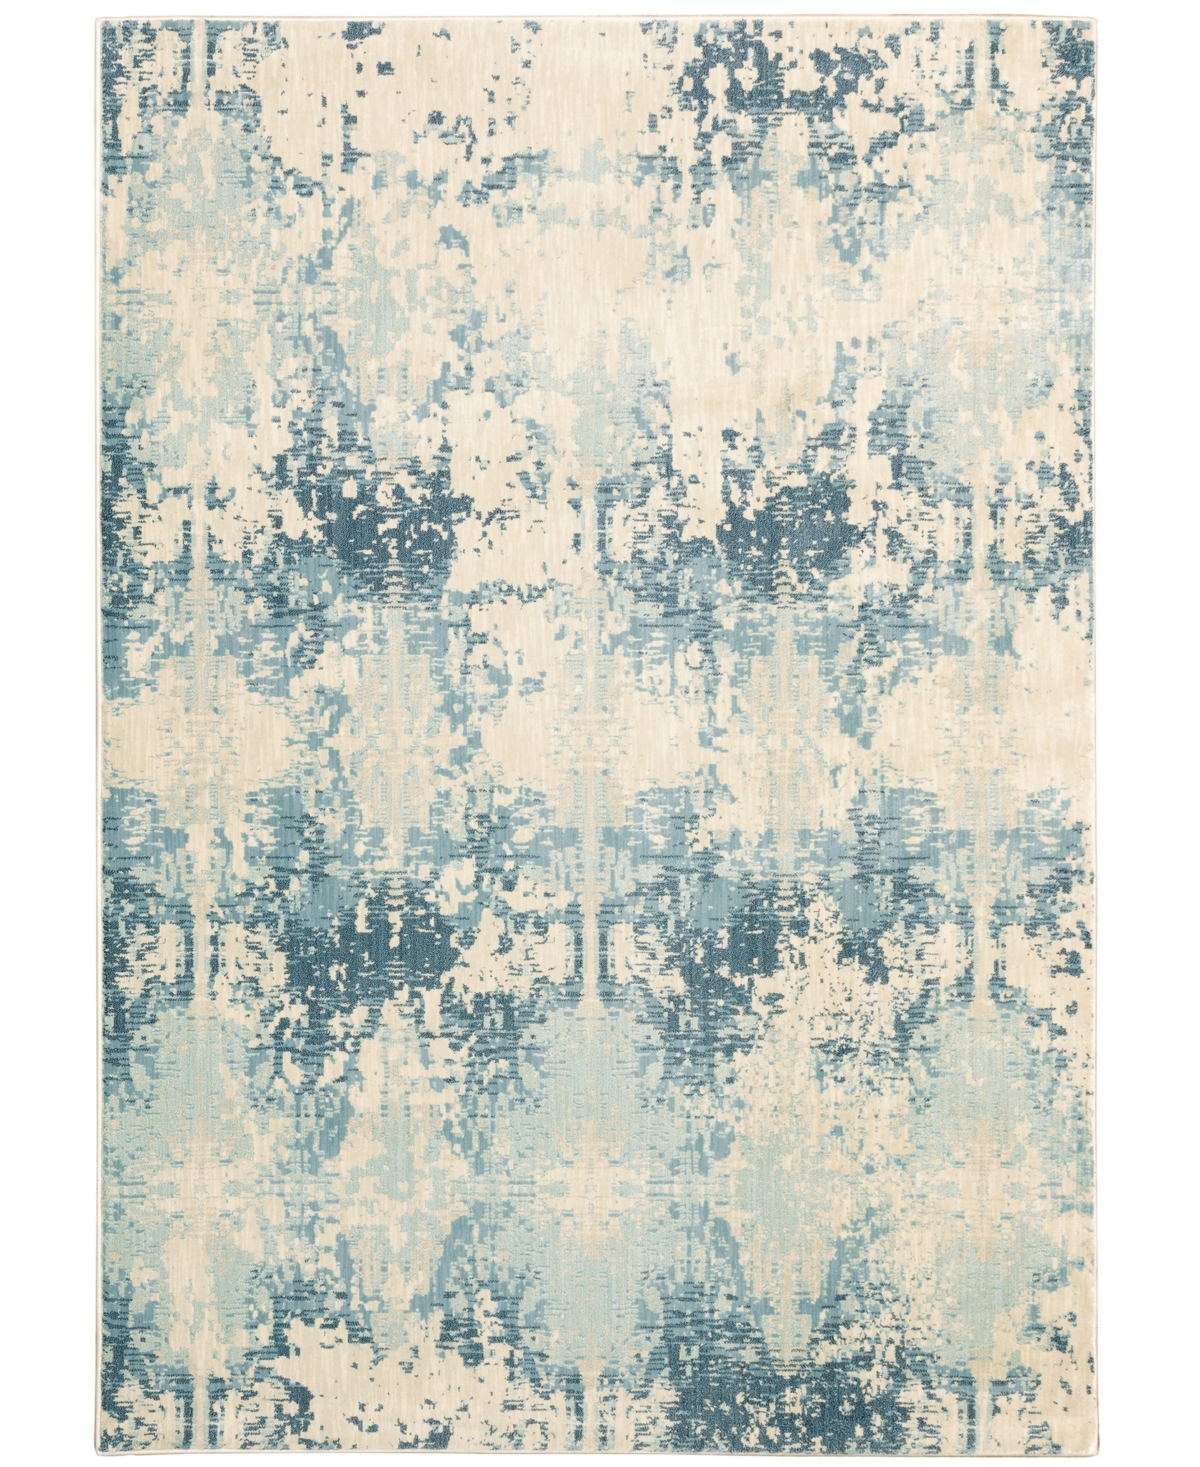 Jhb Design Arcadia ARC15 Ivory 5'3in x 7'6in Area Rug - Blue